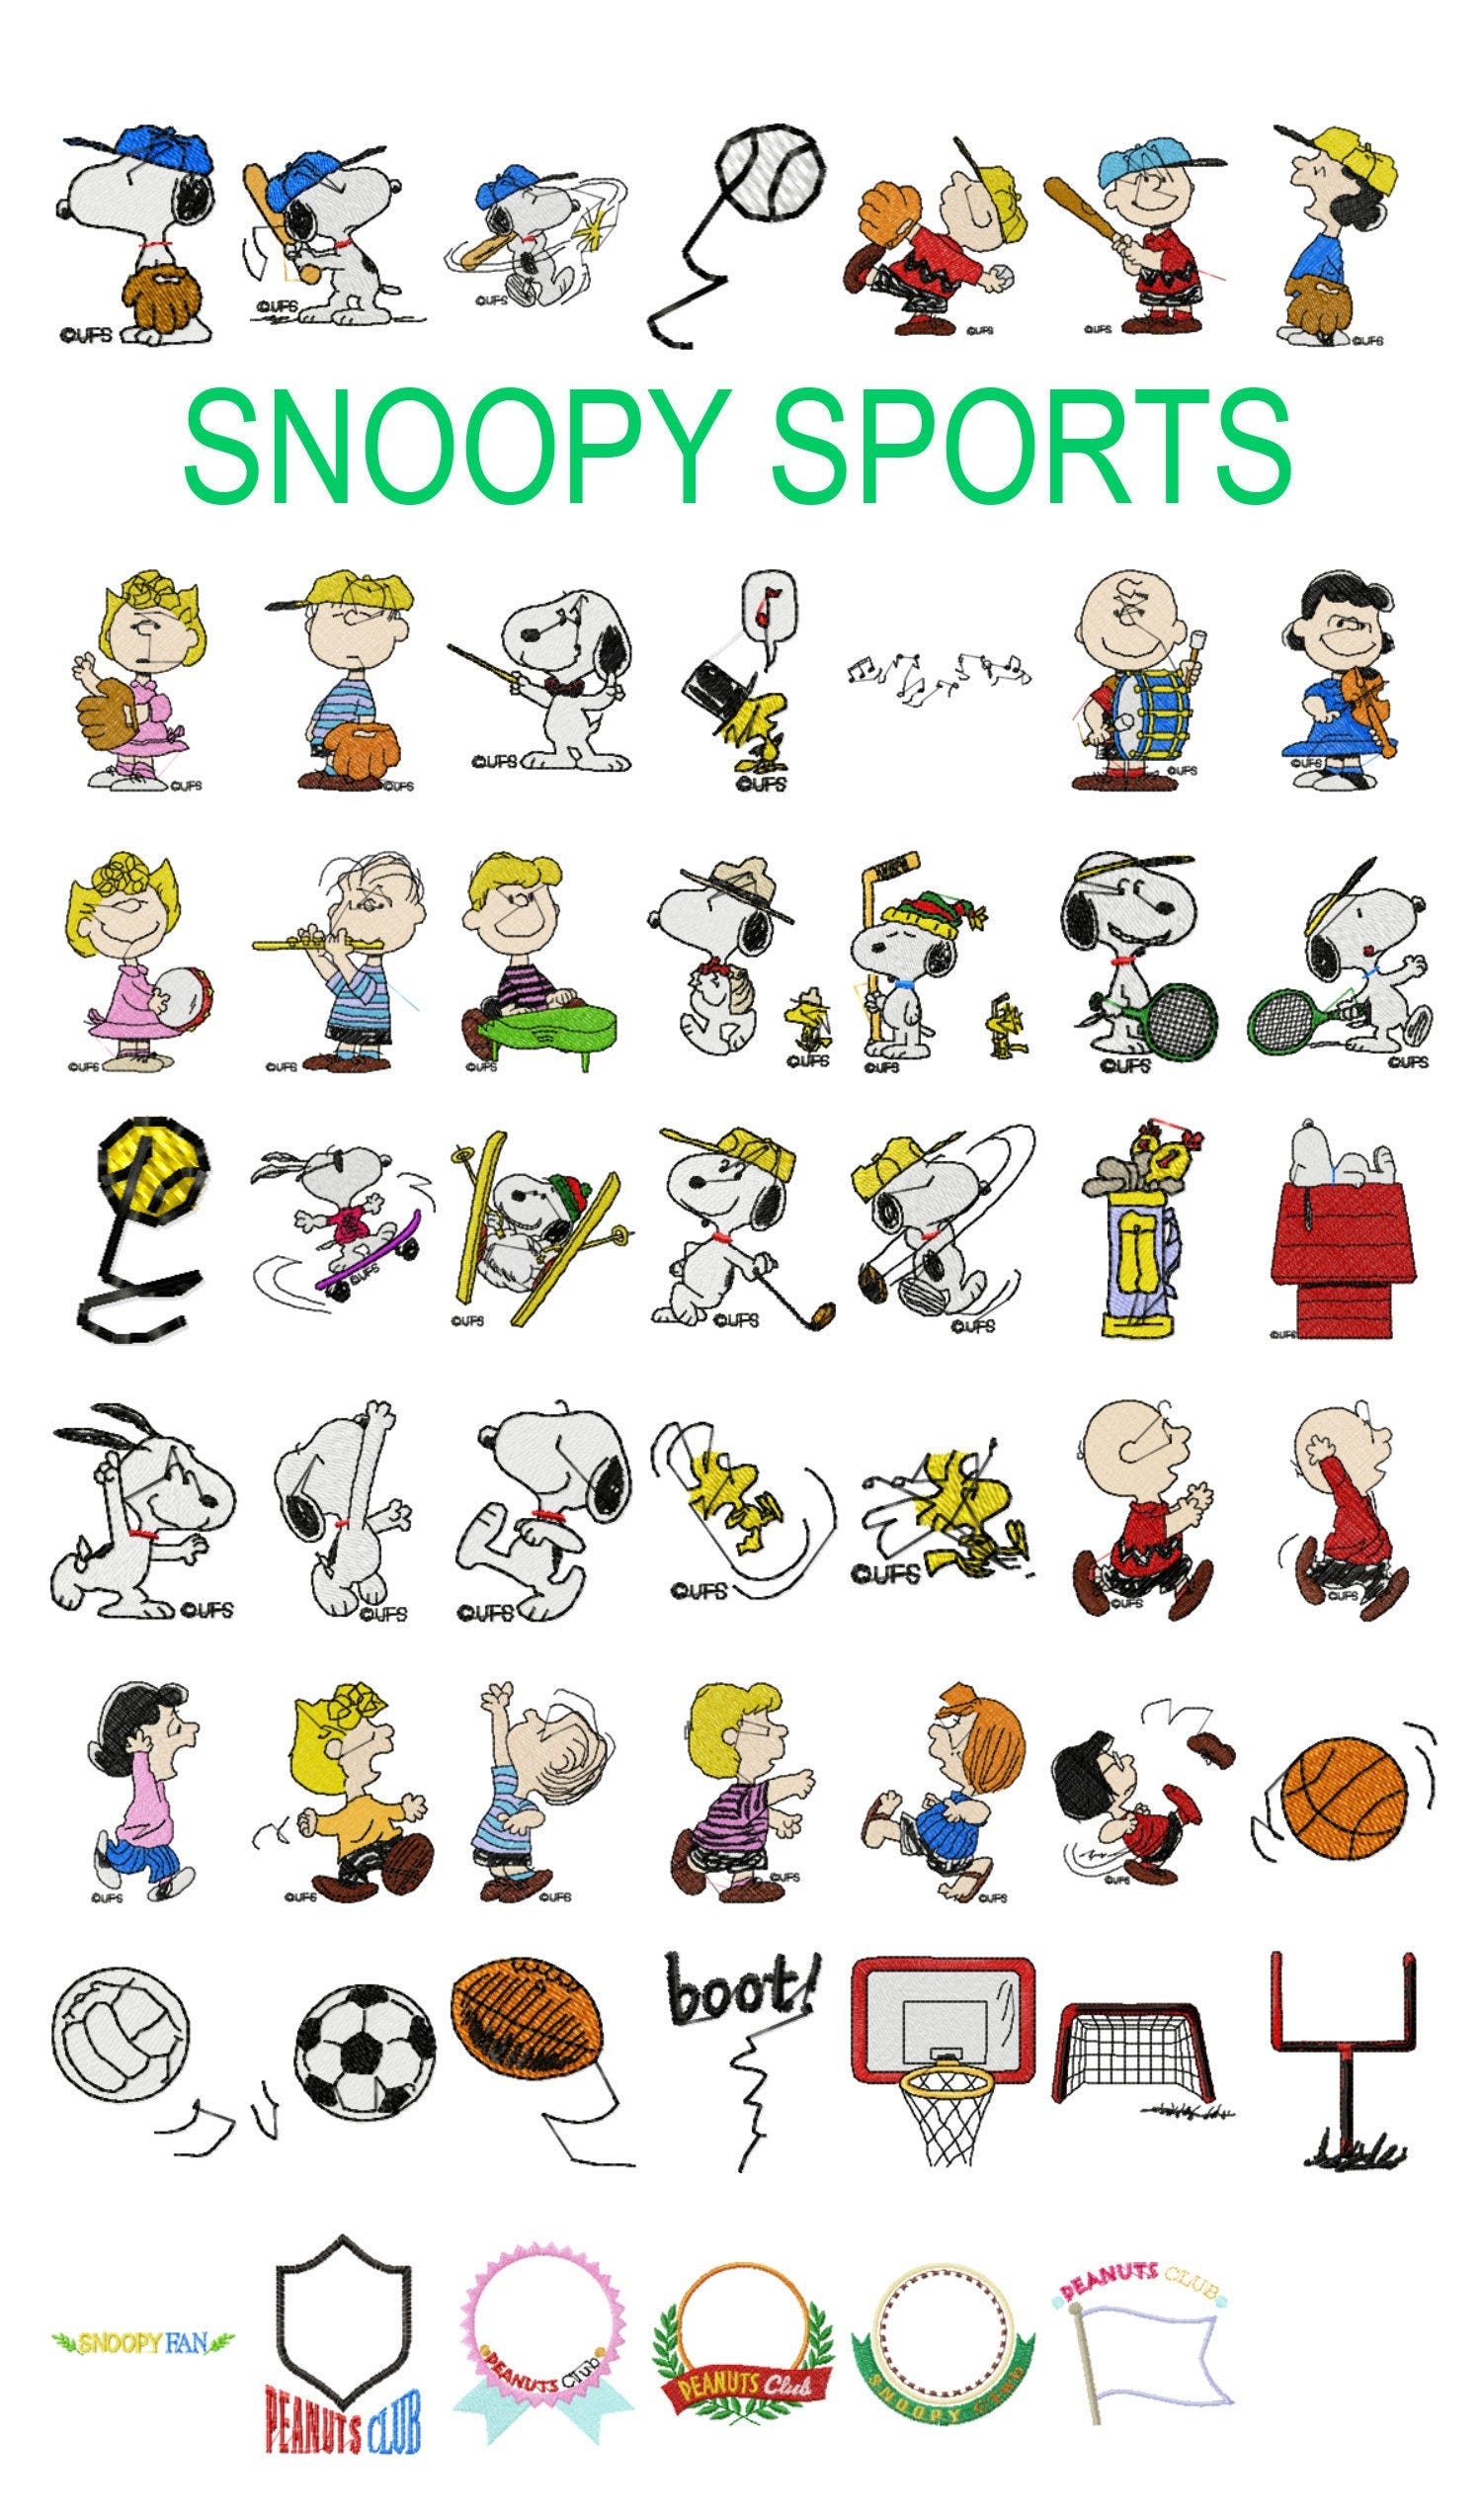 55 Snoopy machine embroidery designs, peanuts embroidery, woodstock pattern, charlie brown, patty linus, sports baseball tennis basketball,